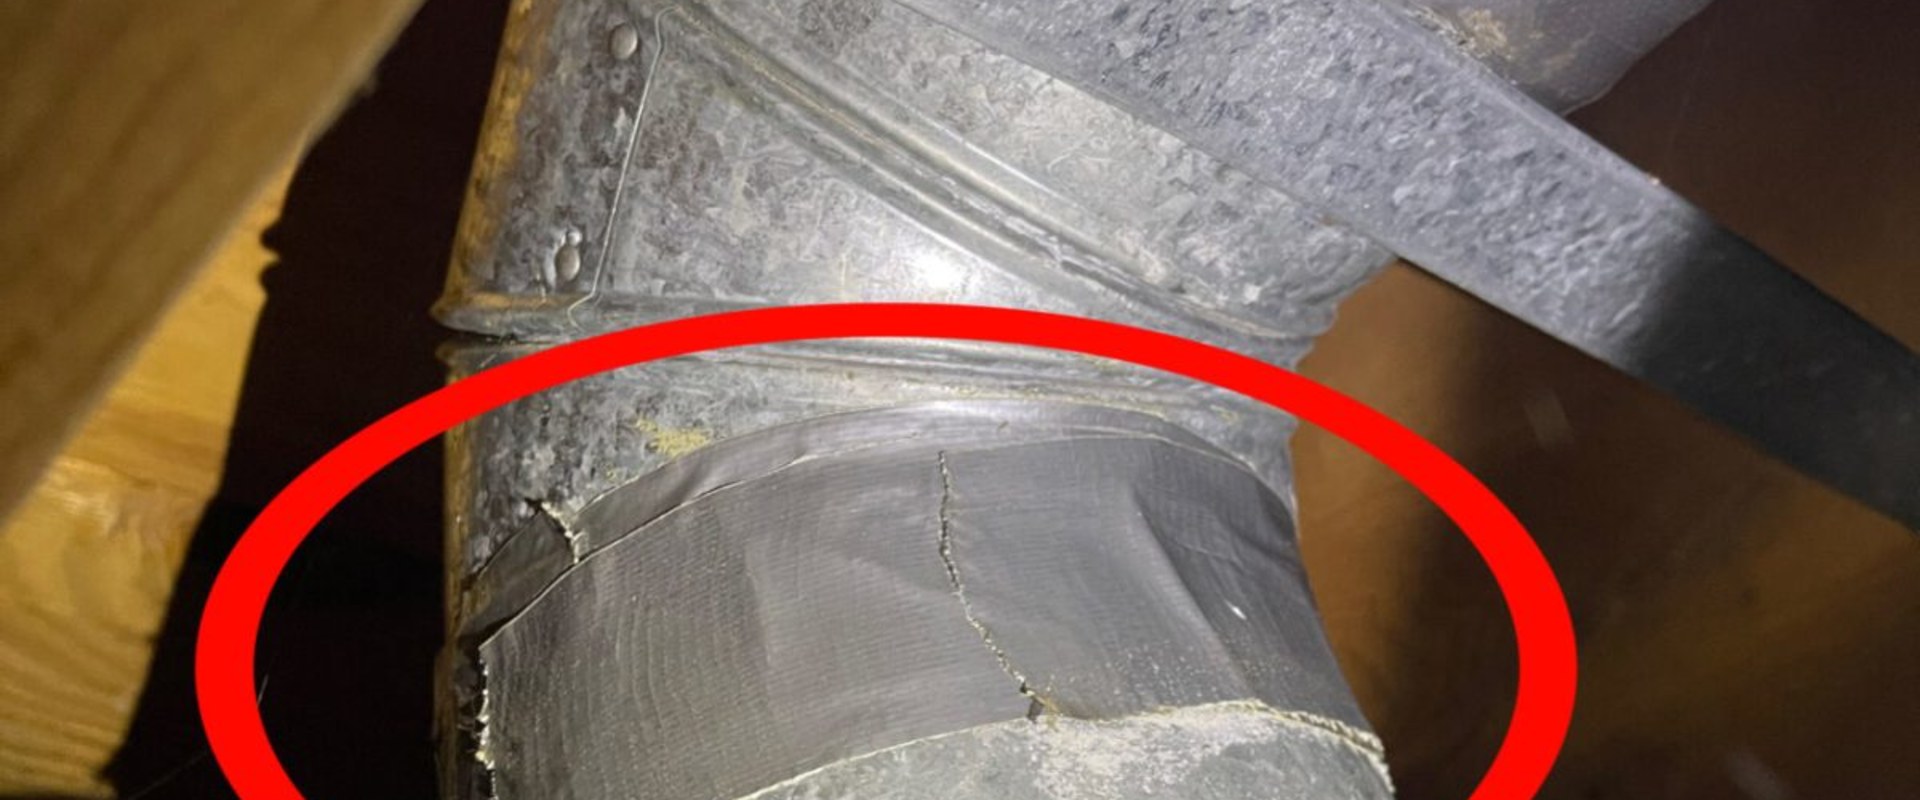 The Power of Aeroseal Duct Sealing